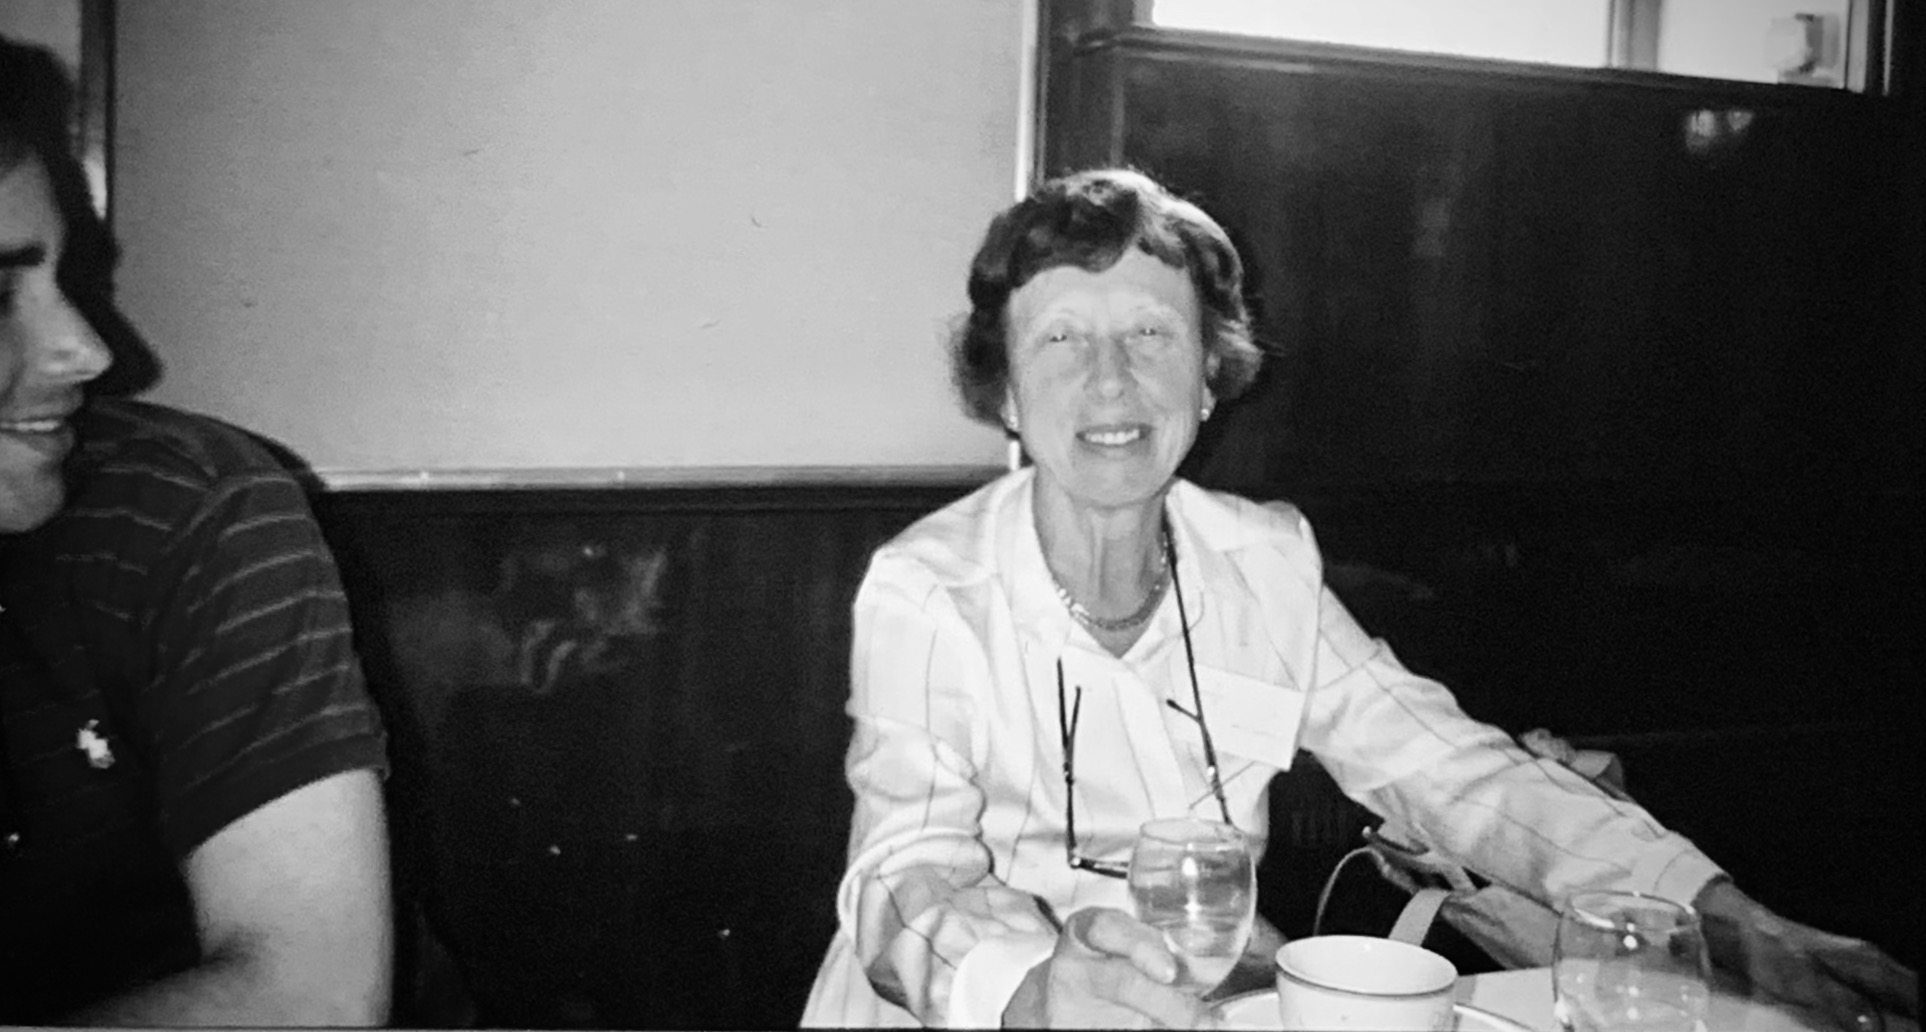 Mary Reynolds smiling as she poses for a photo at the 1980 Joyce Conference in Trieste, Italy